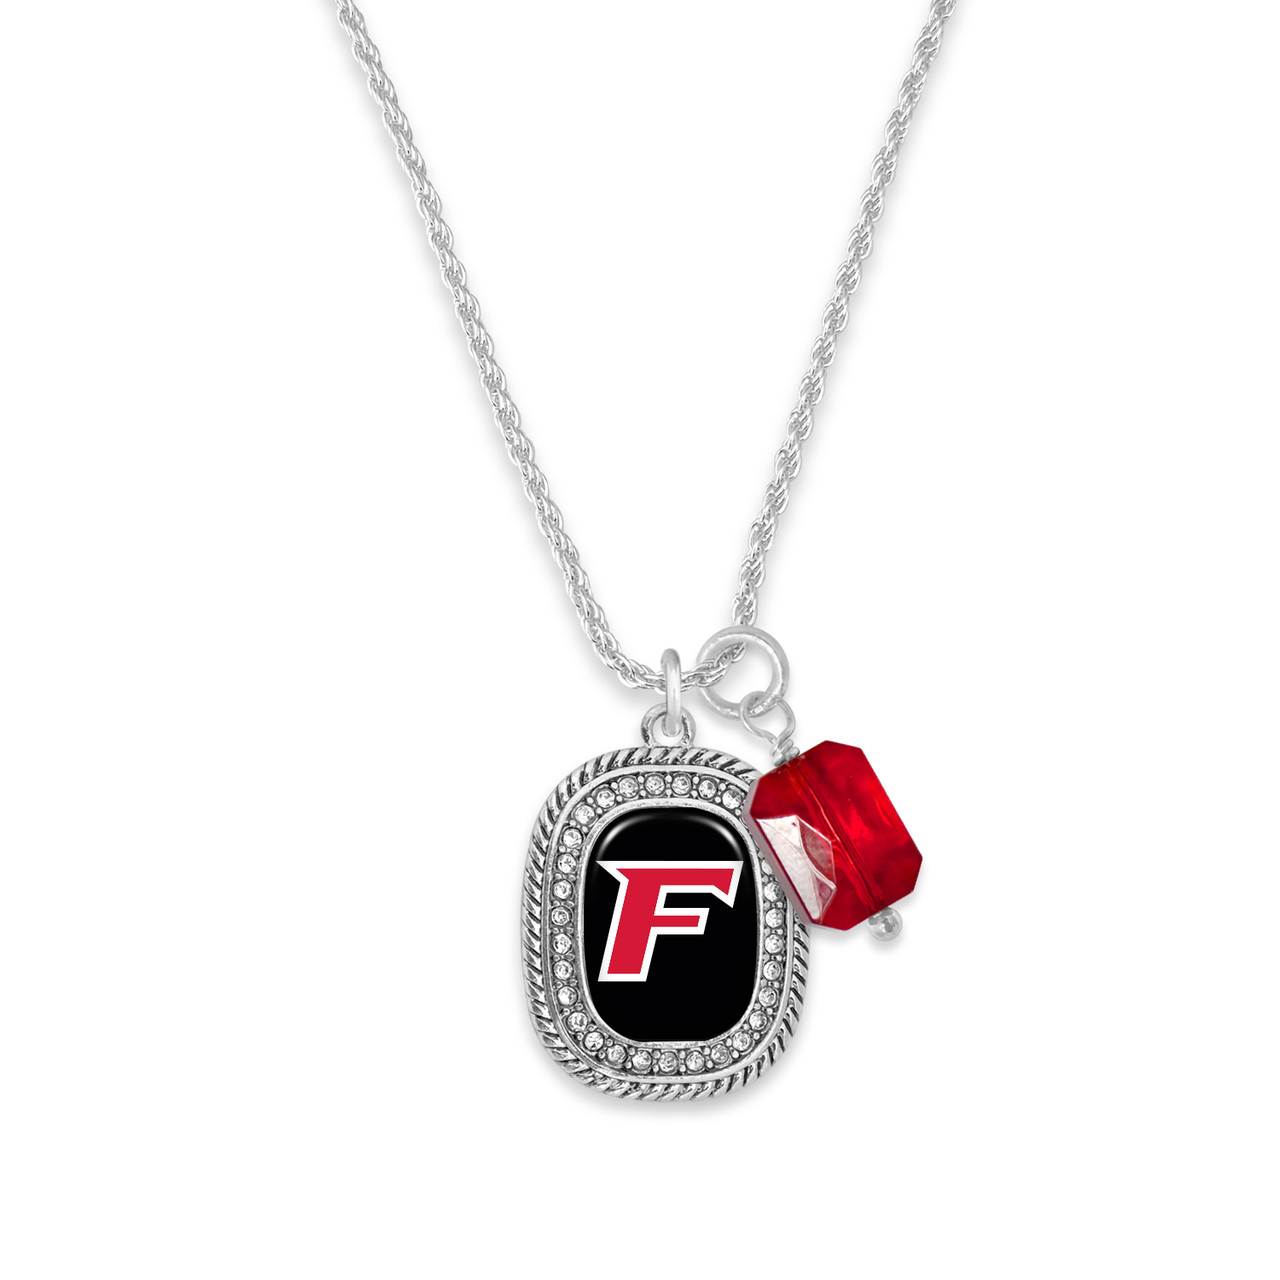 Fairfield Stags Necklace - Madison